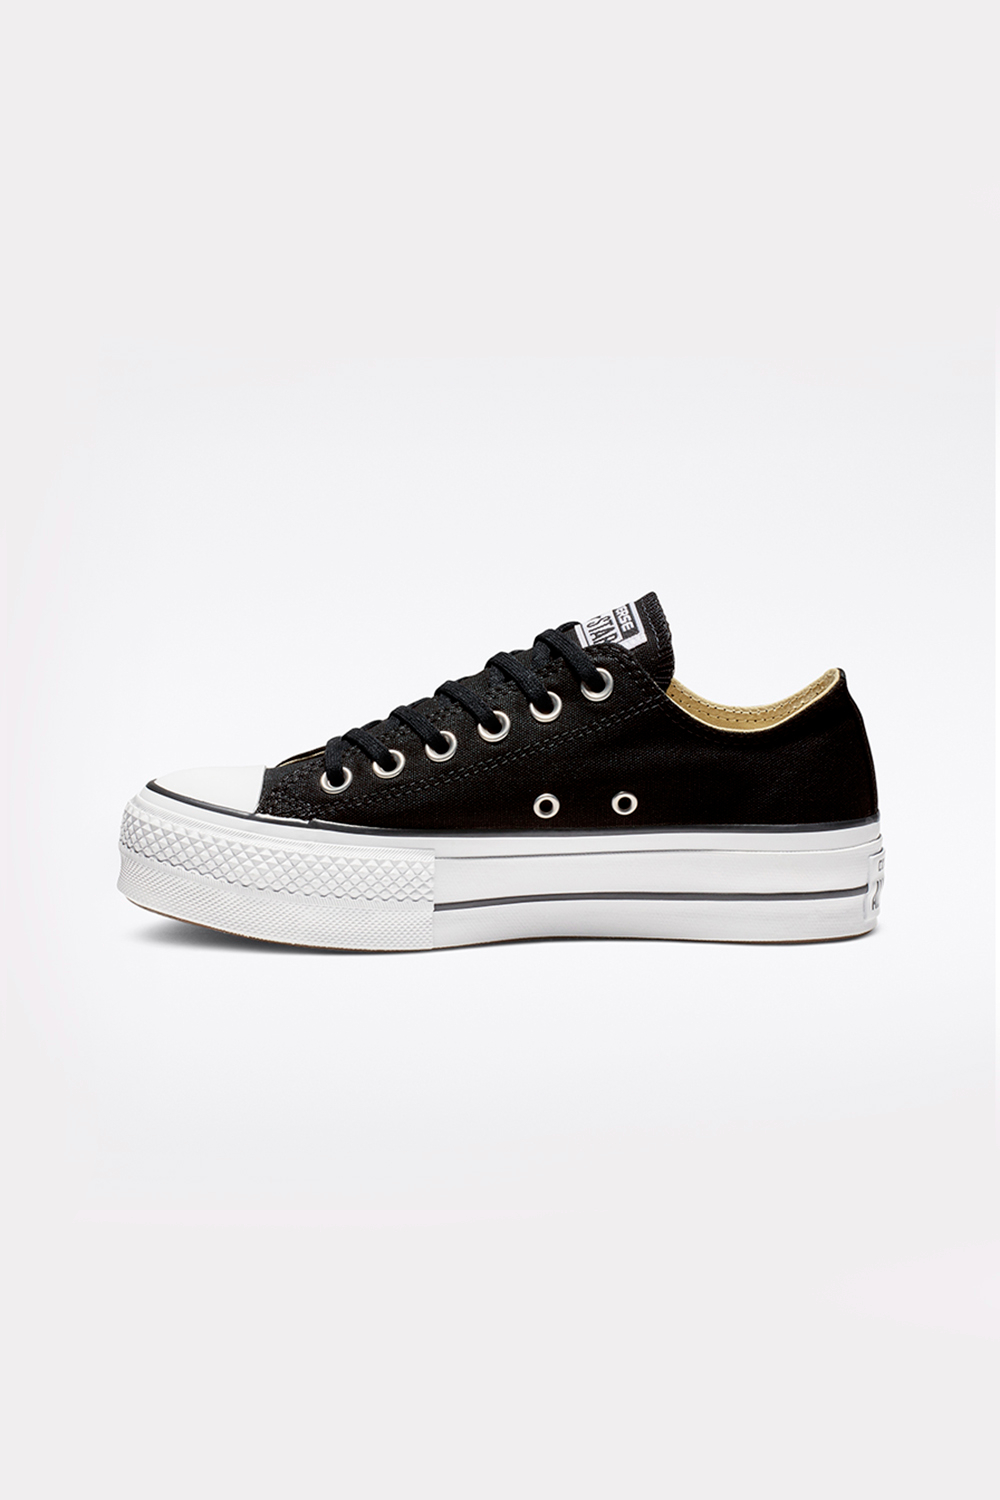 Converse Womens Lifestyle Shoes | Odel.lk